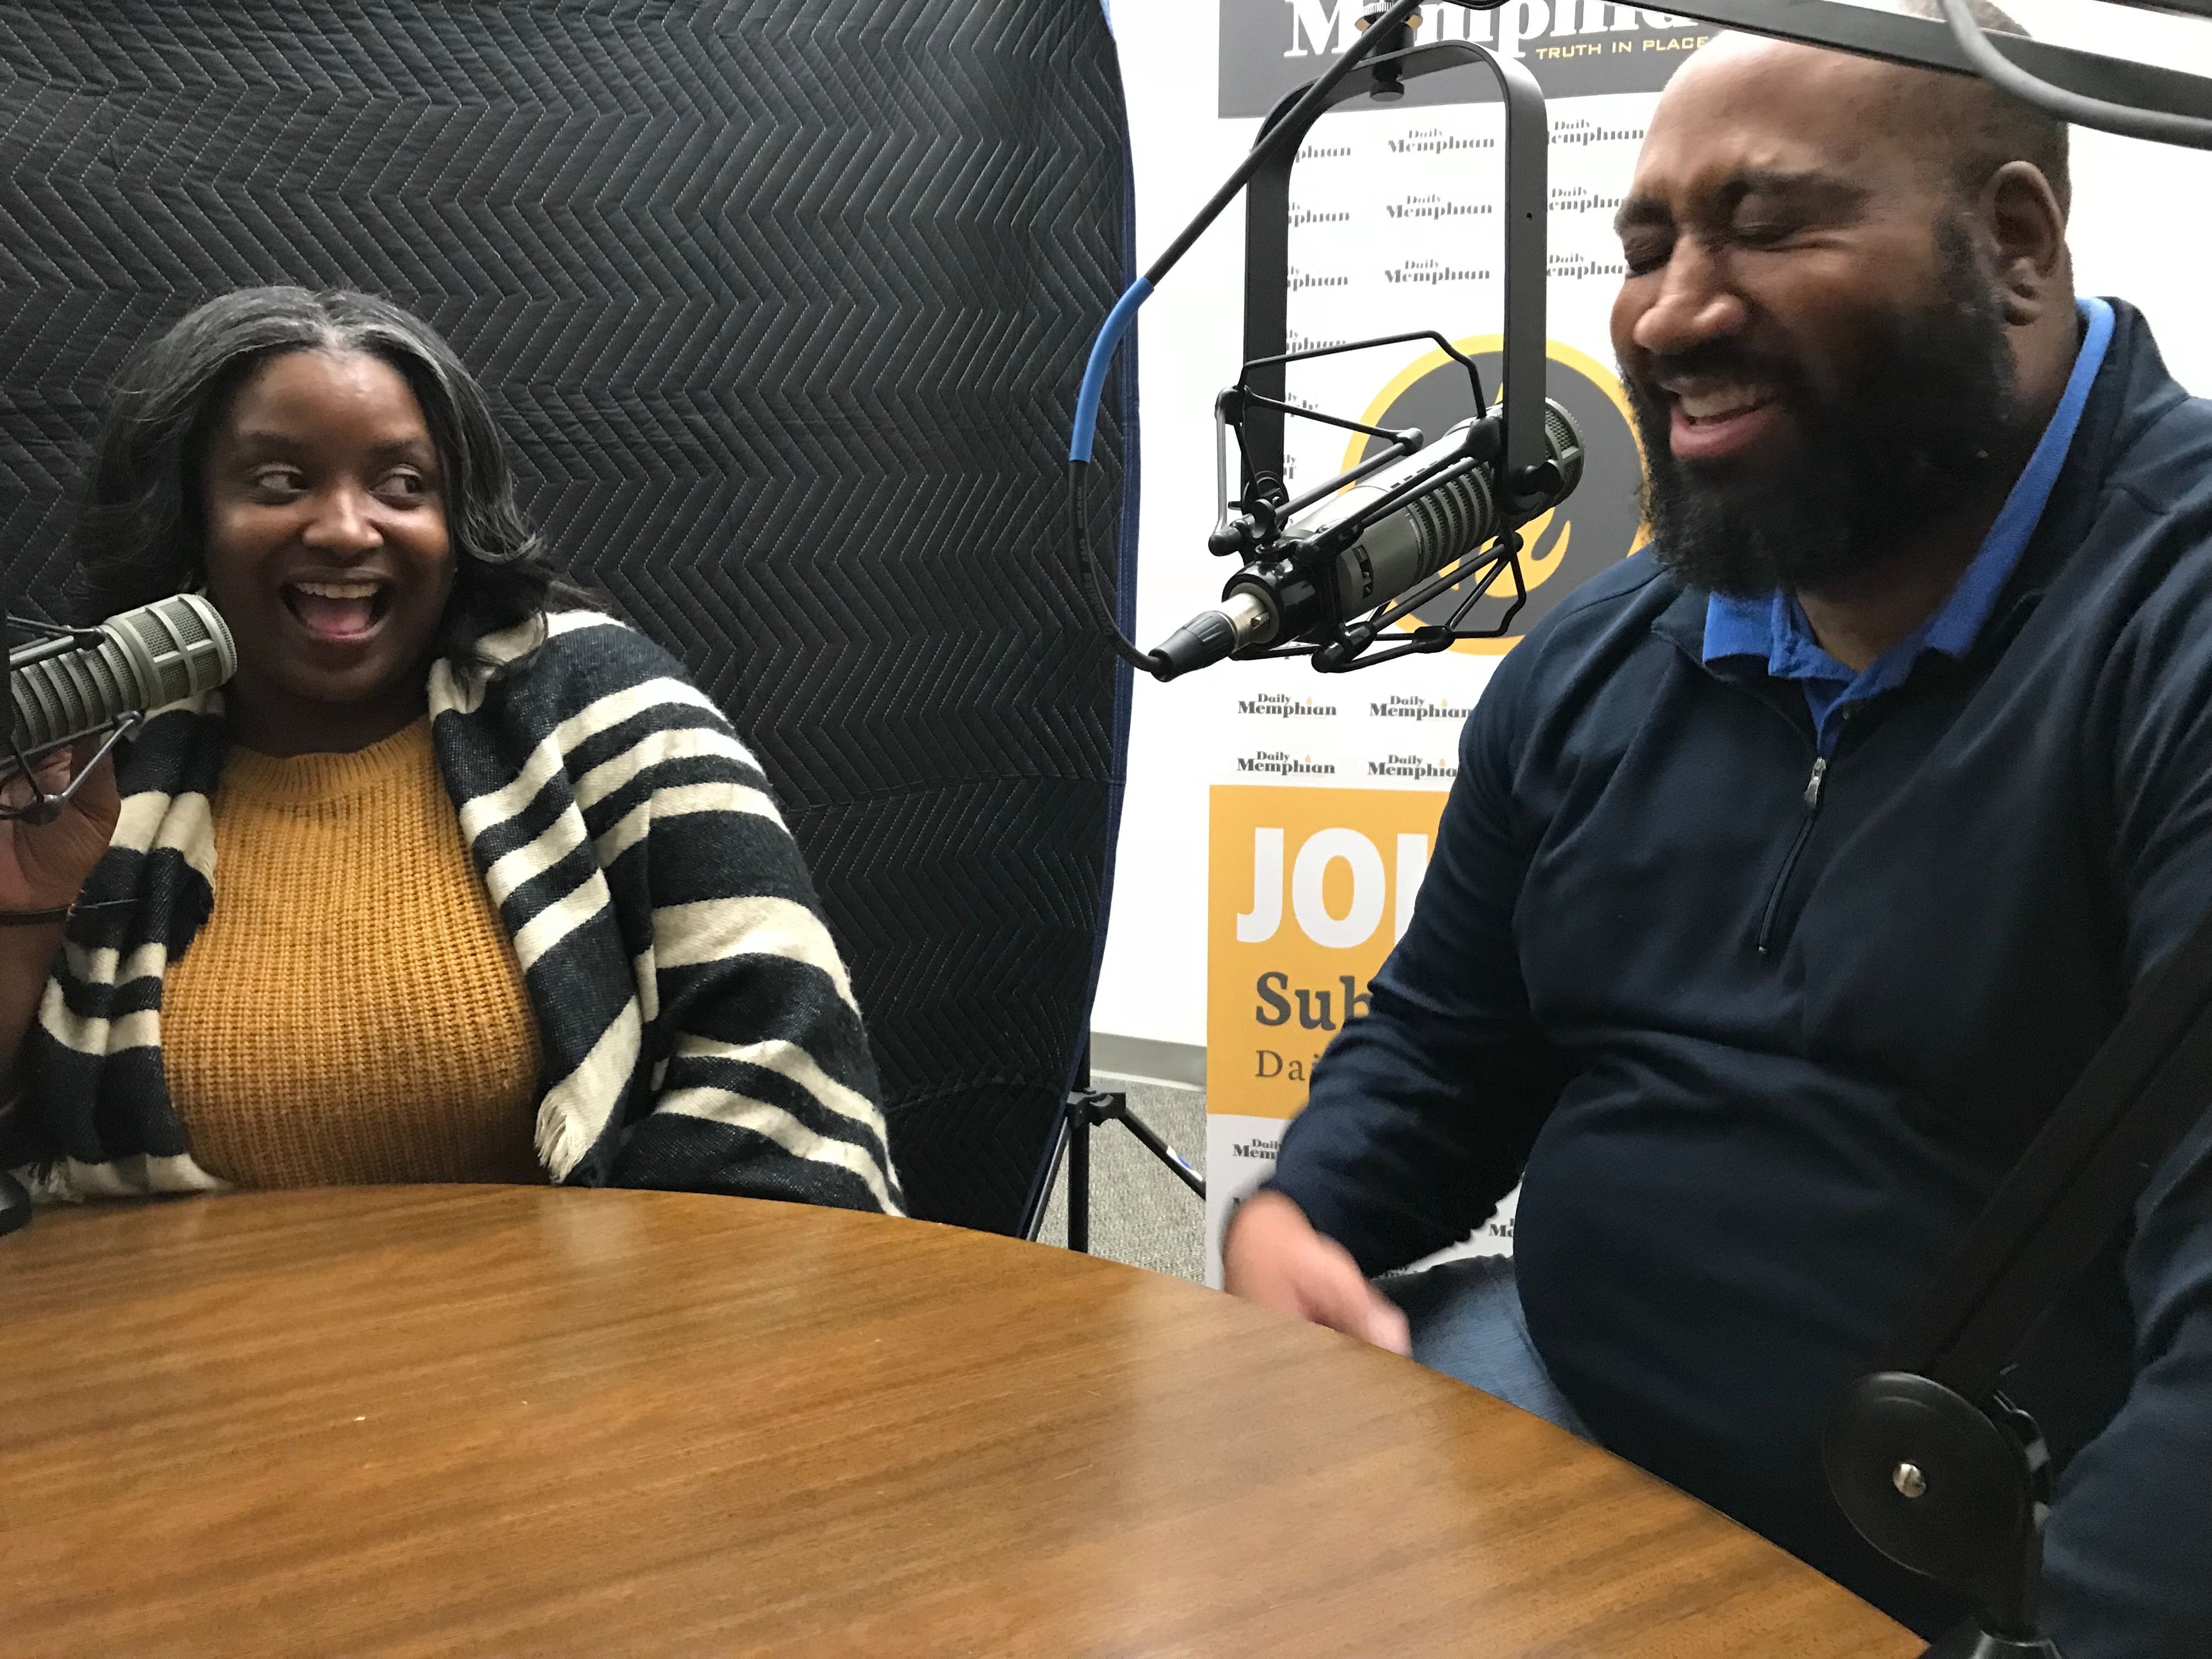 Crystal Chopin (L) and Brandis Leverette with Oasis of Hope discuss the organization's work in the Bickford-Bearwater area of North Memphis on the On the Ground Podcast. (Natalie Van Gundy)